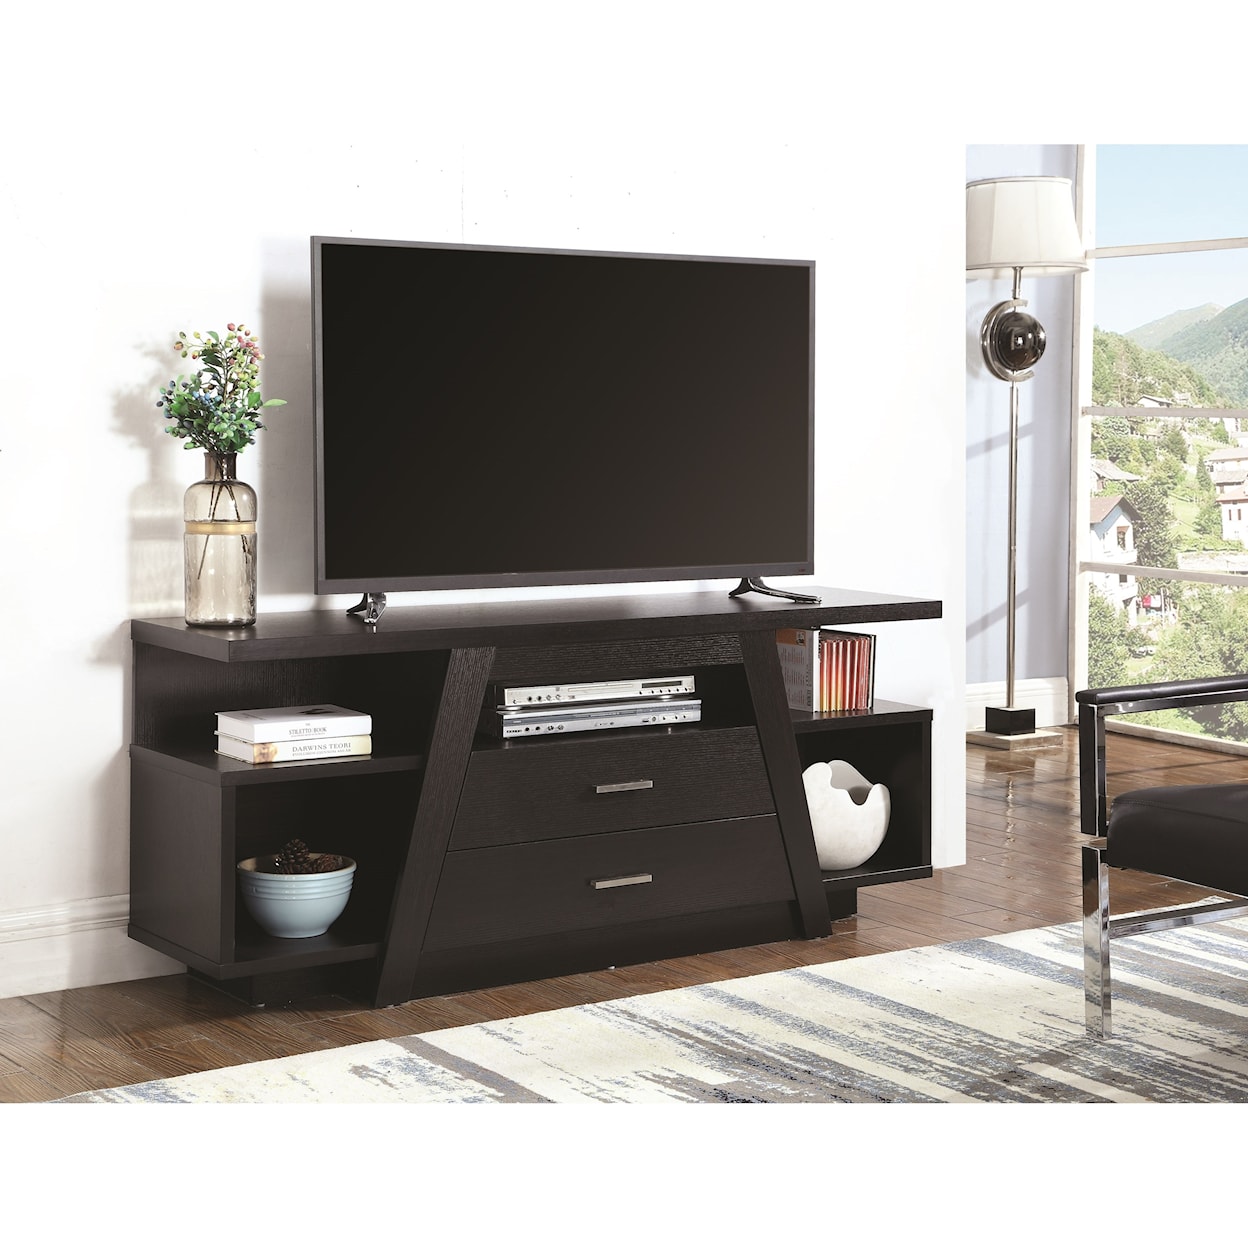 Coaster TV Stands 721110 Contemporary Black TV Stand | Knight Furniture ...